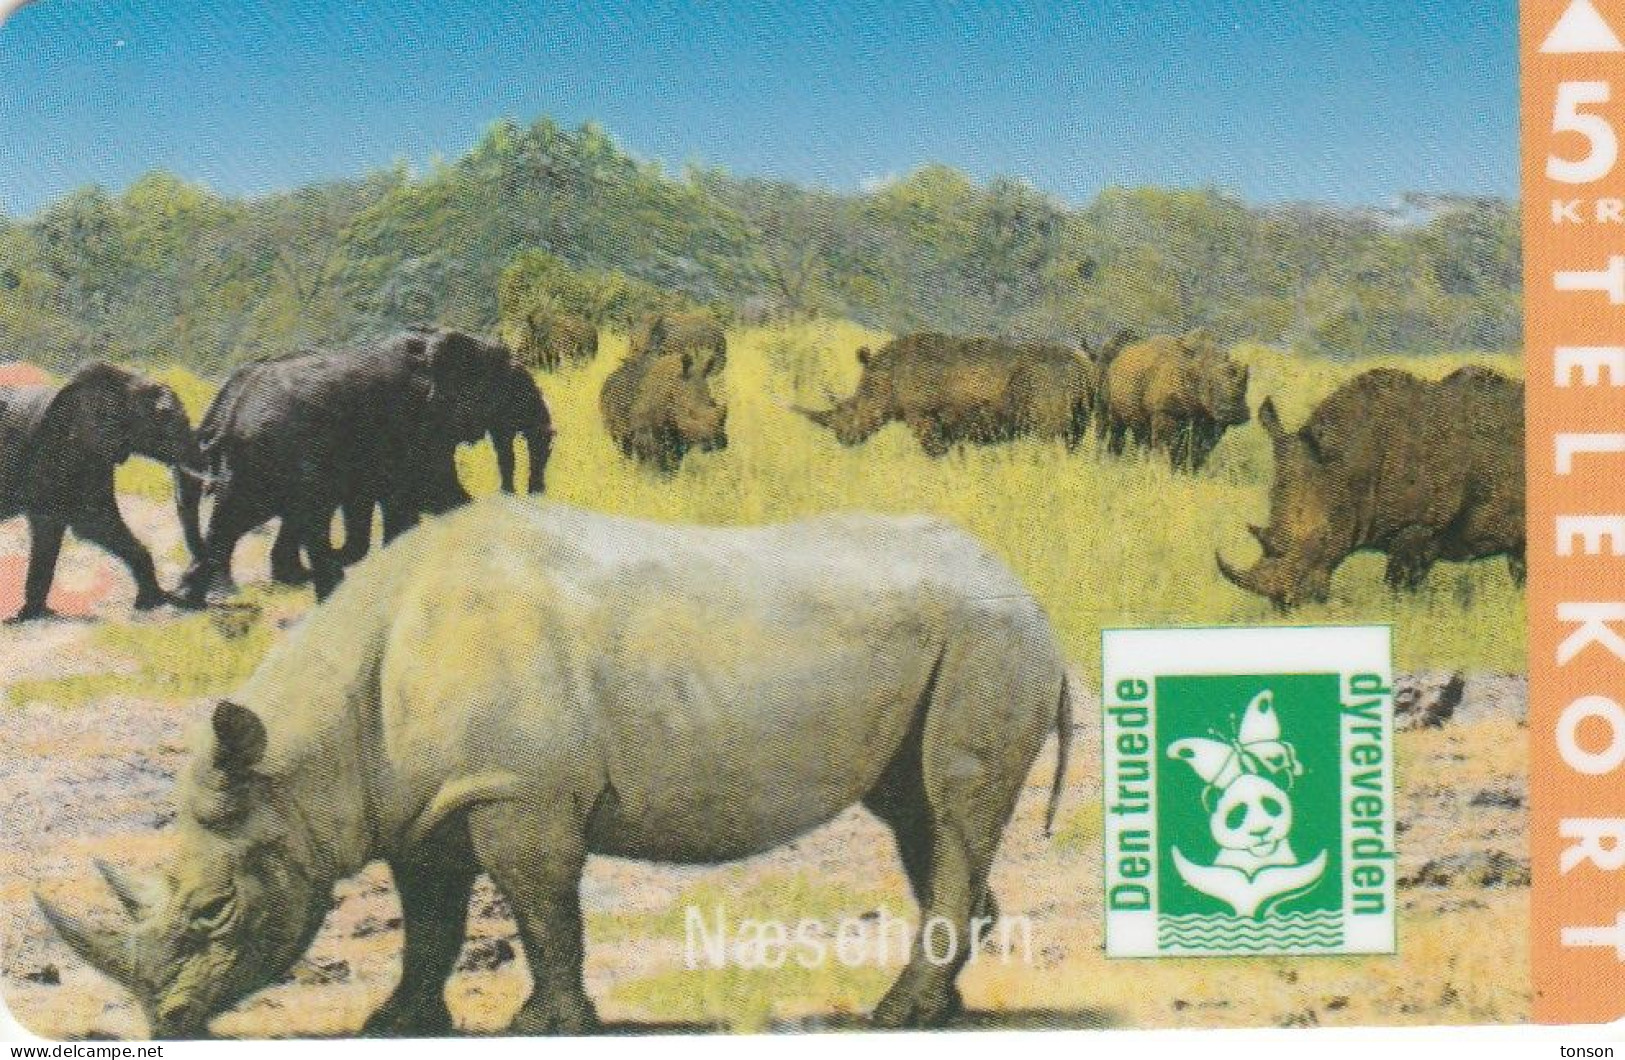 Denmark, KP 073, Rhinoceros (Part Of Puzzle 2/2), Mint Only 3500 Issued, 2 Scans. - Danemark